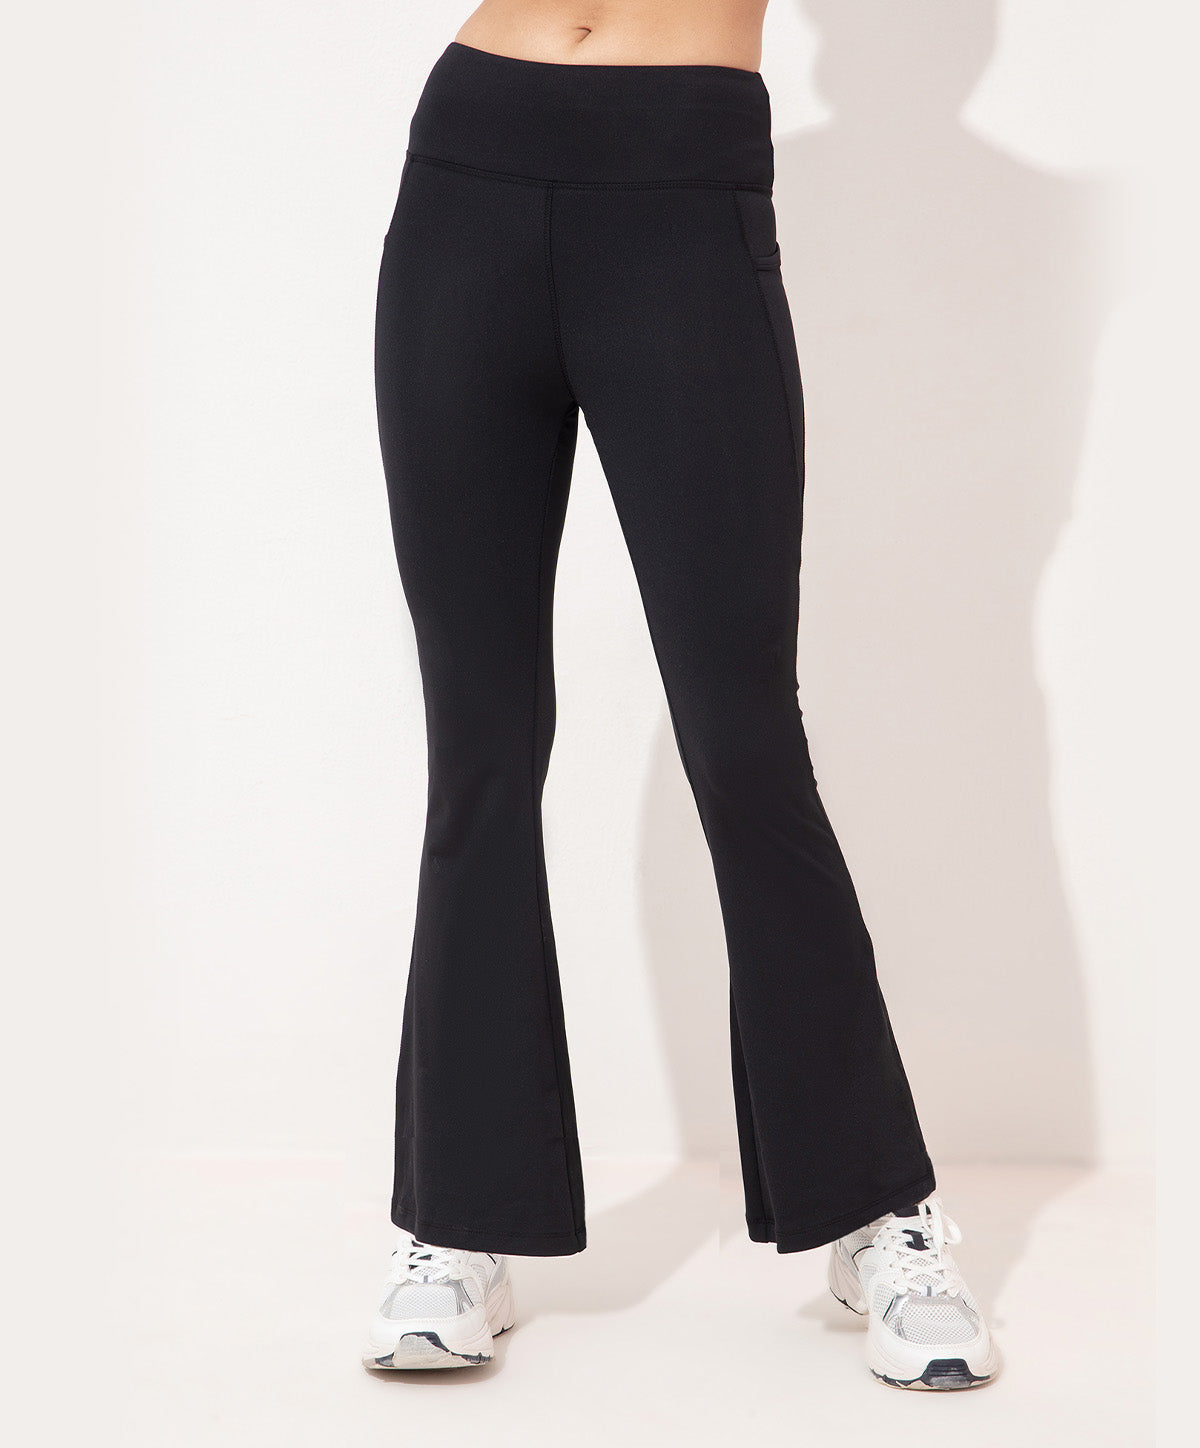 Buy High Waist Flared Yoga Pants in Black with Side Pockets Online India  Best Prices COD  Clovia  AB0090A13